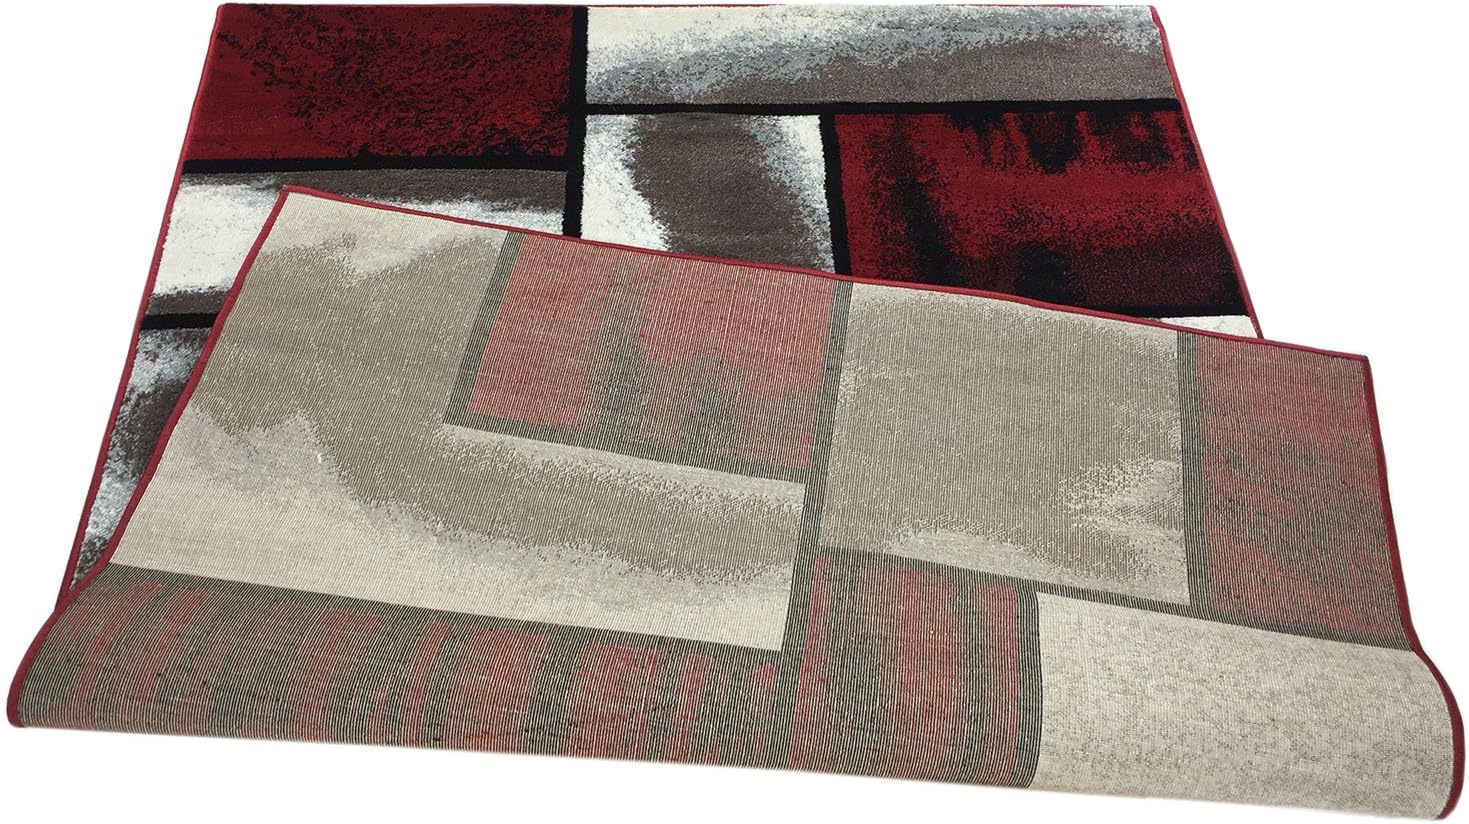 Comfy Collection Squares Contemporary Geometric Design Area Rug (Red/Cappuccino, 4'11" x 6'11")-3